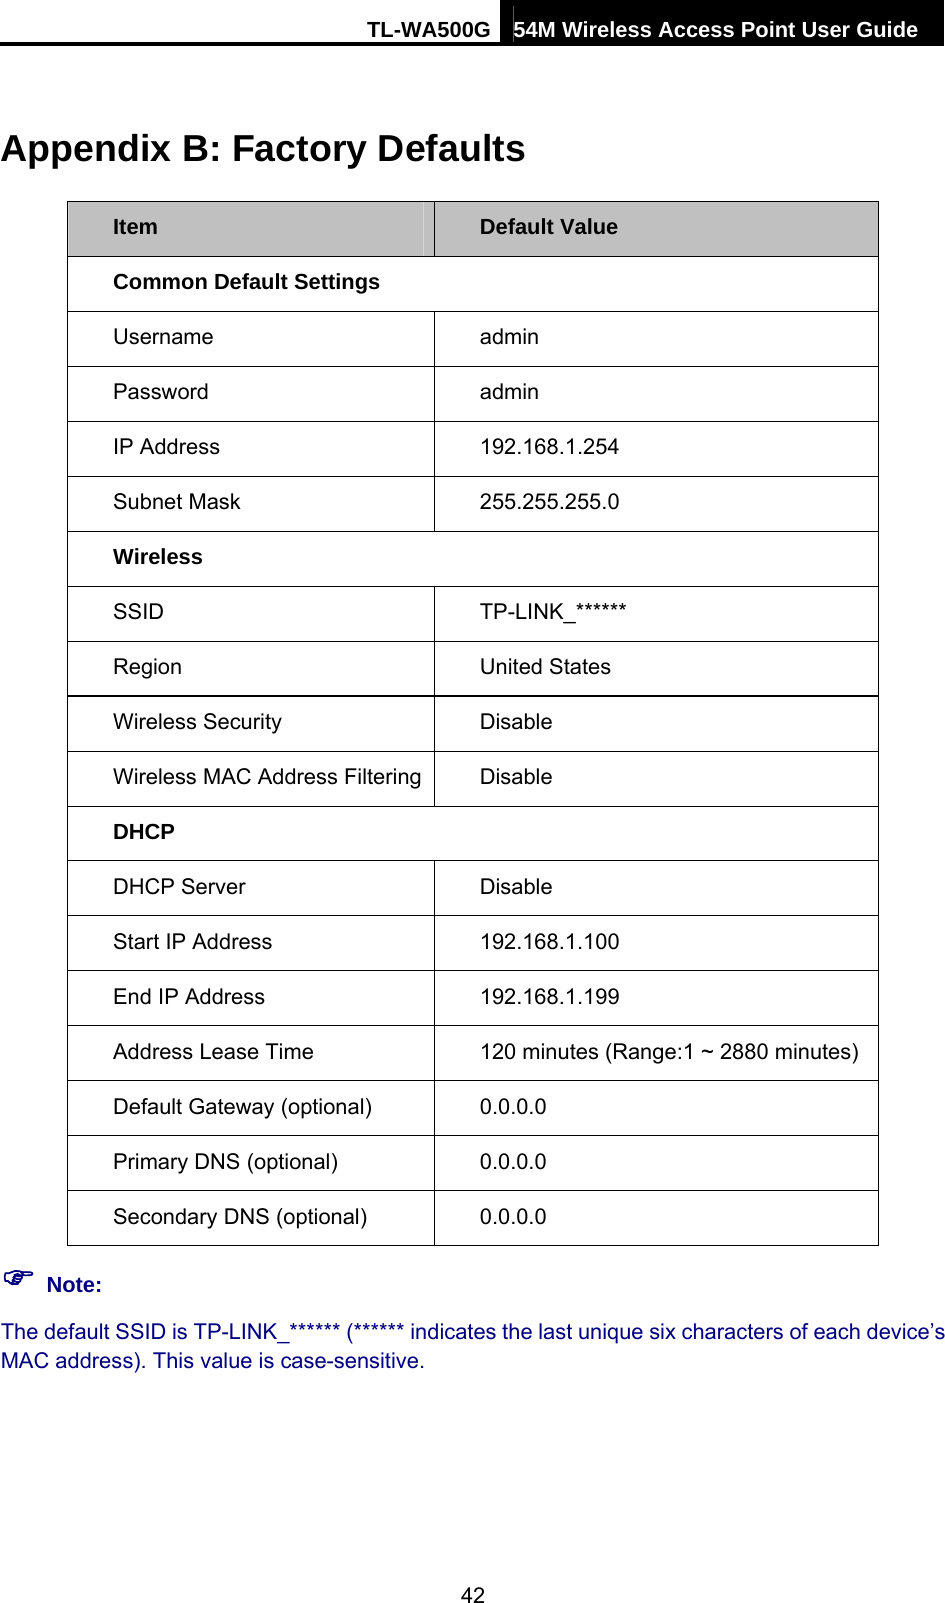 TL-WA500G 54M Wireless Access Point User Guide  Appendix B: Factory Defaults Item  Default Value Common Default Settings Username   admin Password  admin IP Address  192.168.1.254 Subnet Mask    255.255.255.0 Wireless SSID  TP-LINK_****** Region  United States Wireless Security  Disable Wireless MAC Address Filtering  Disable DHCP DHCP Server  Disable Start IP Address  192.168.1.100 End IP Address  192.168.1.199 Address Lease Time  120 minutes (Range:1 ~ 2880 minutes) Default Gateway (optional)    0.0.0.0 Primary DNS (optional)  0.0.0.0 Secondary DNS (optional)    0.0.0.0 ) Note: The default SSID is TP-LINK_****** (****** indicates the last unique six characters of each device’s MAC address). This value is case-sensitive. 42 